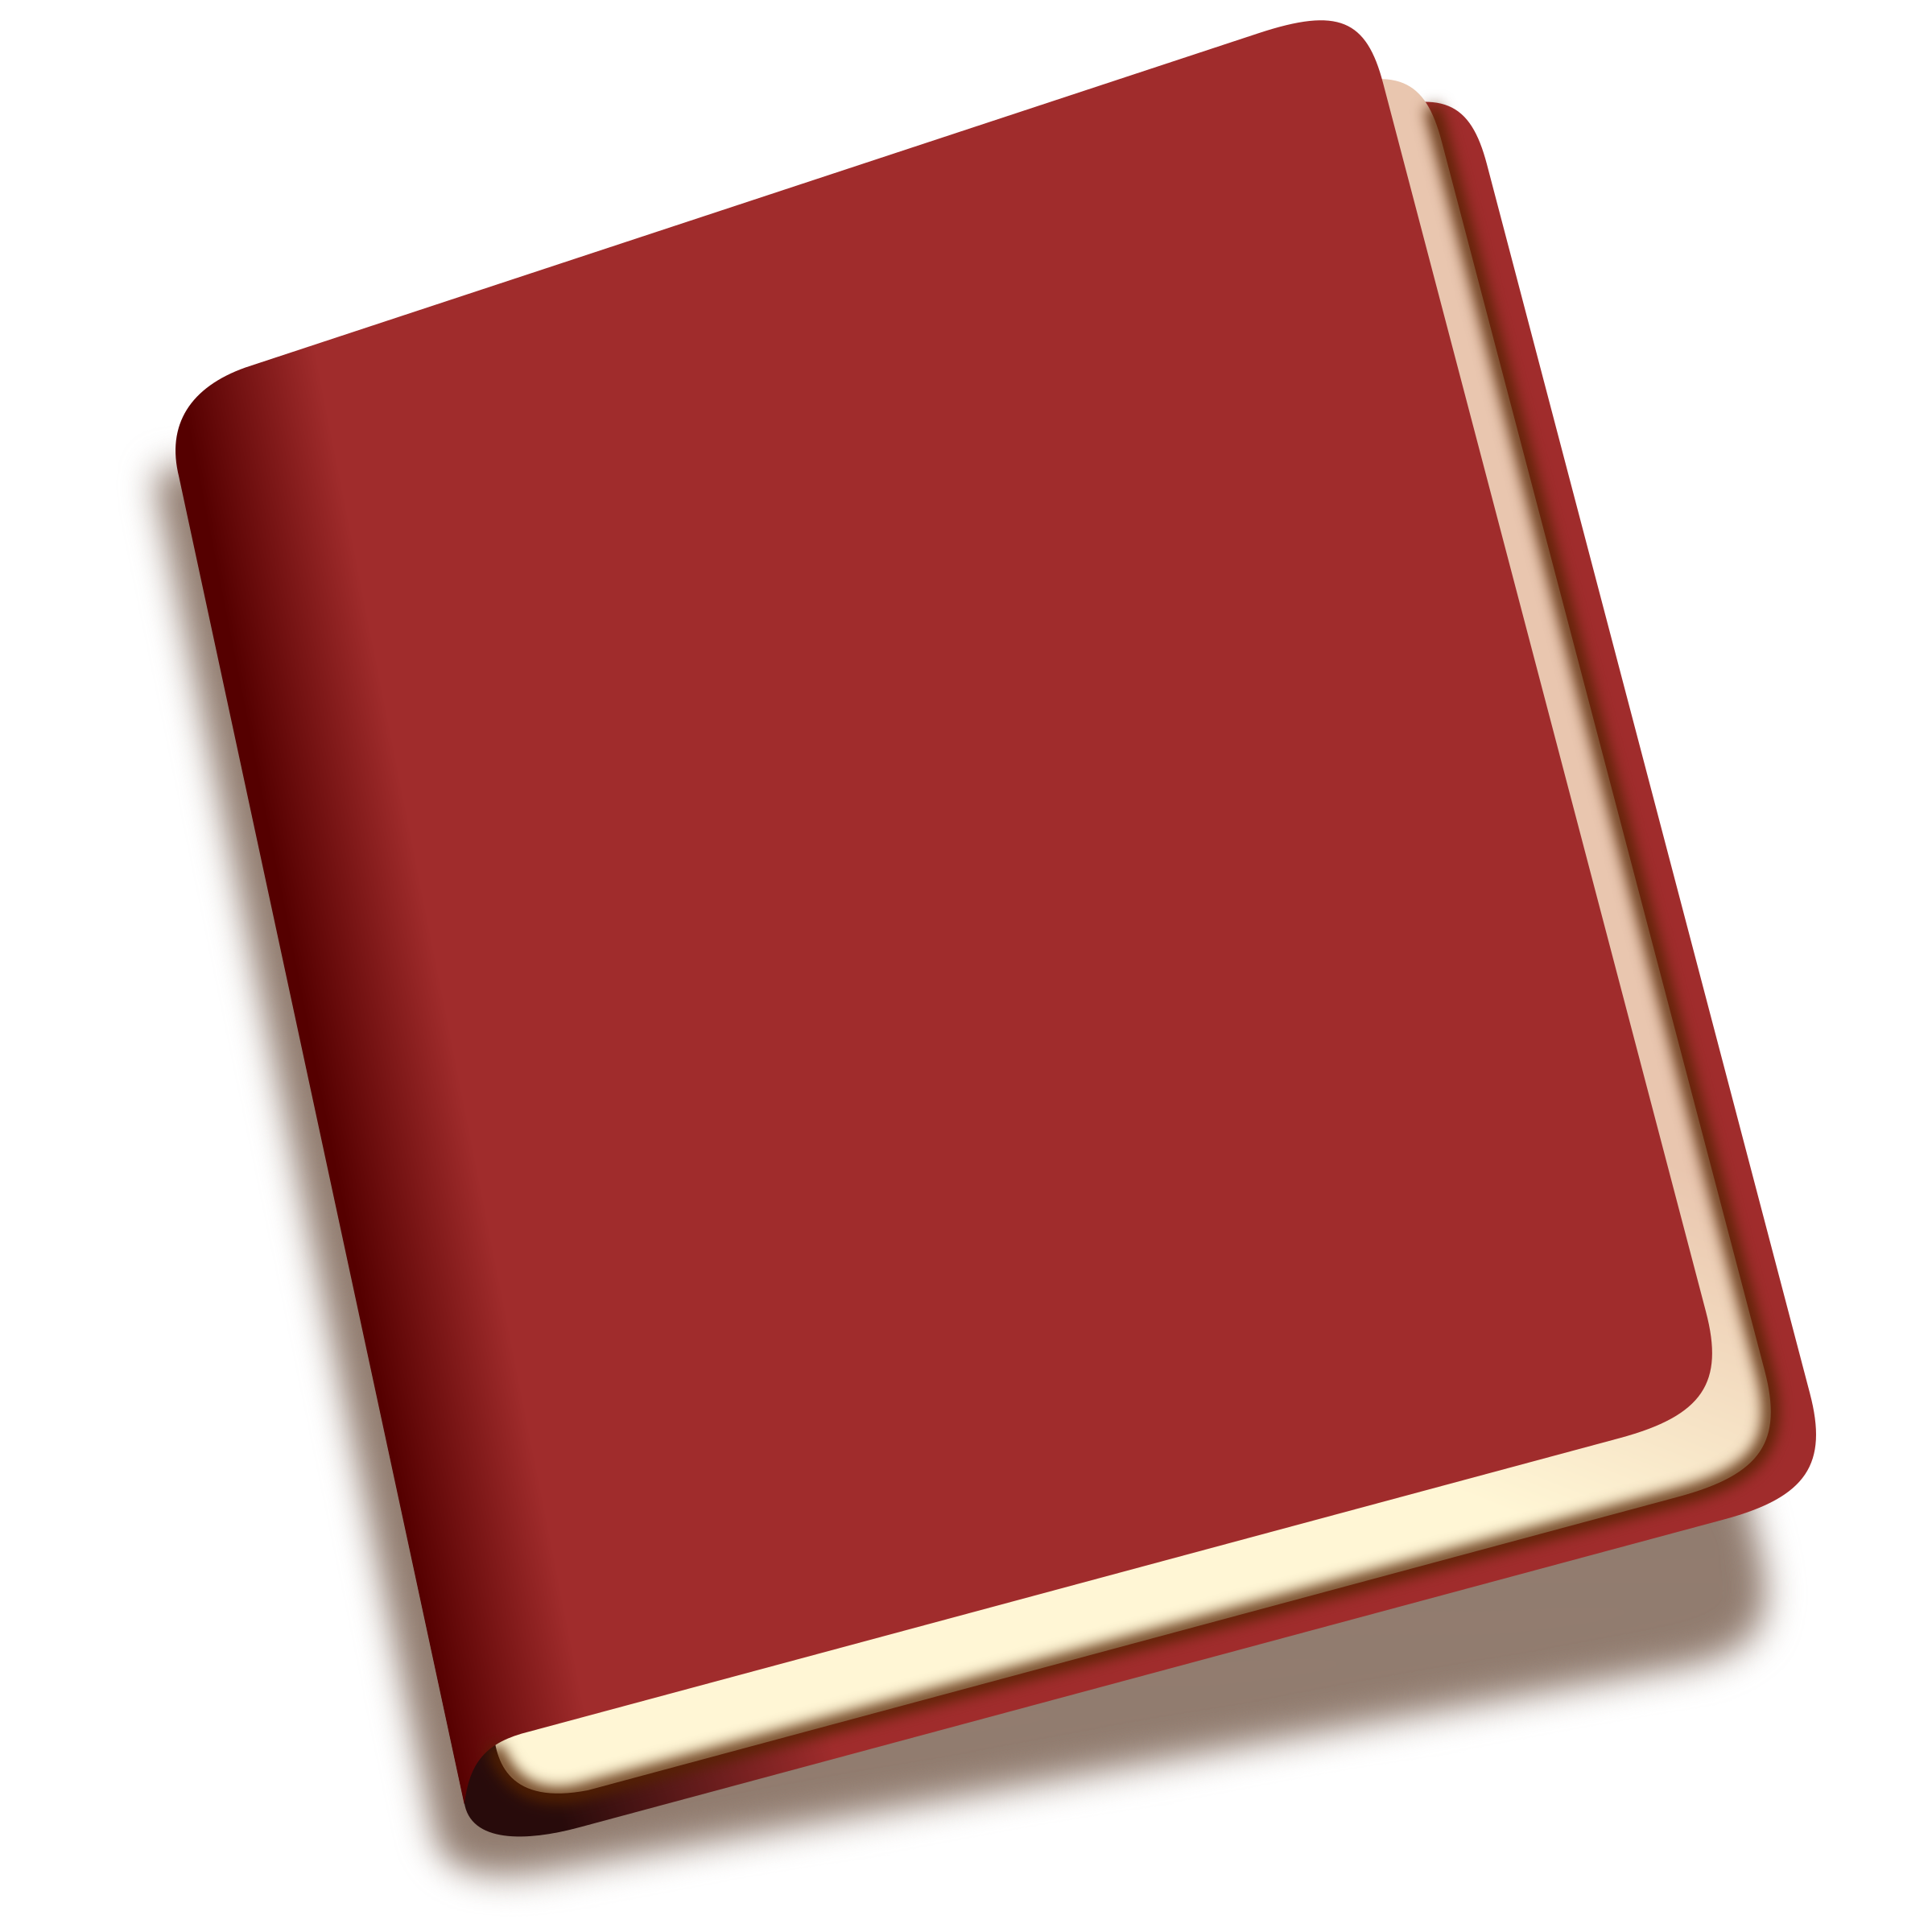 Red Book Icon Vector Clipart image - Free stock photo - Public ...